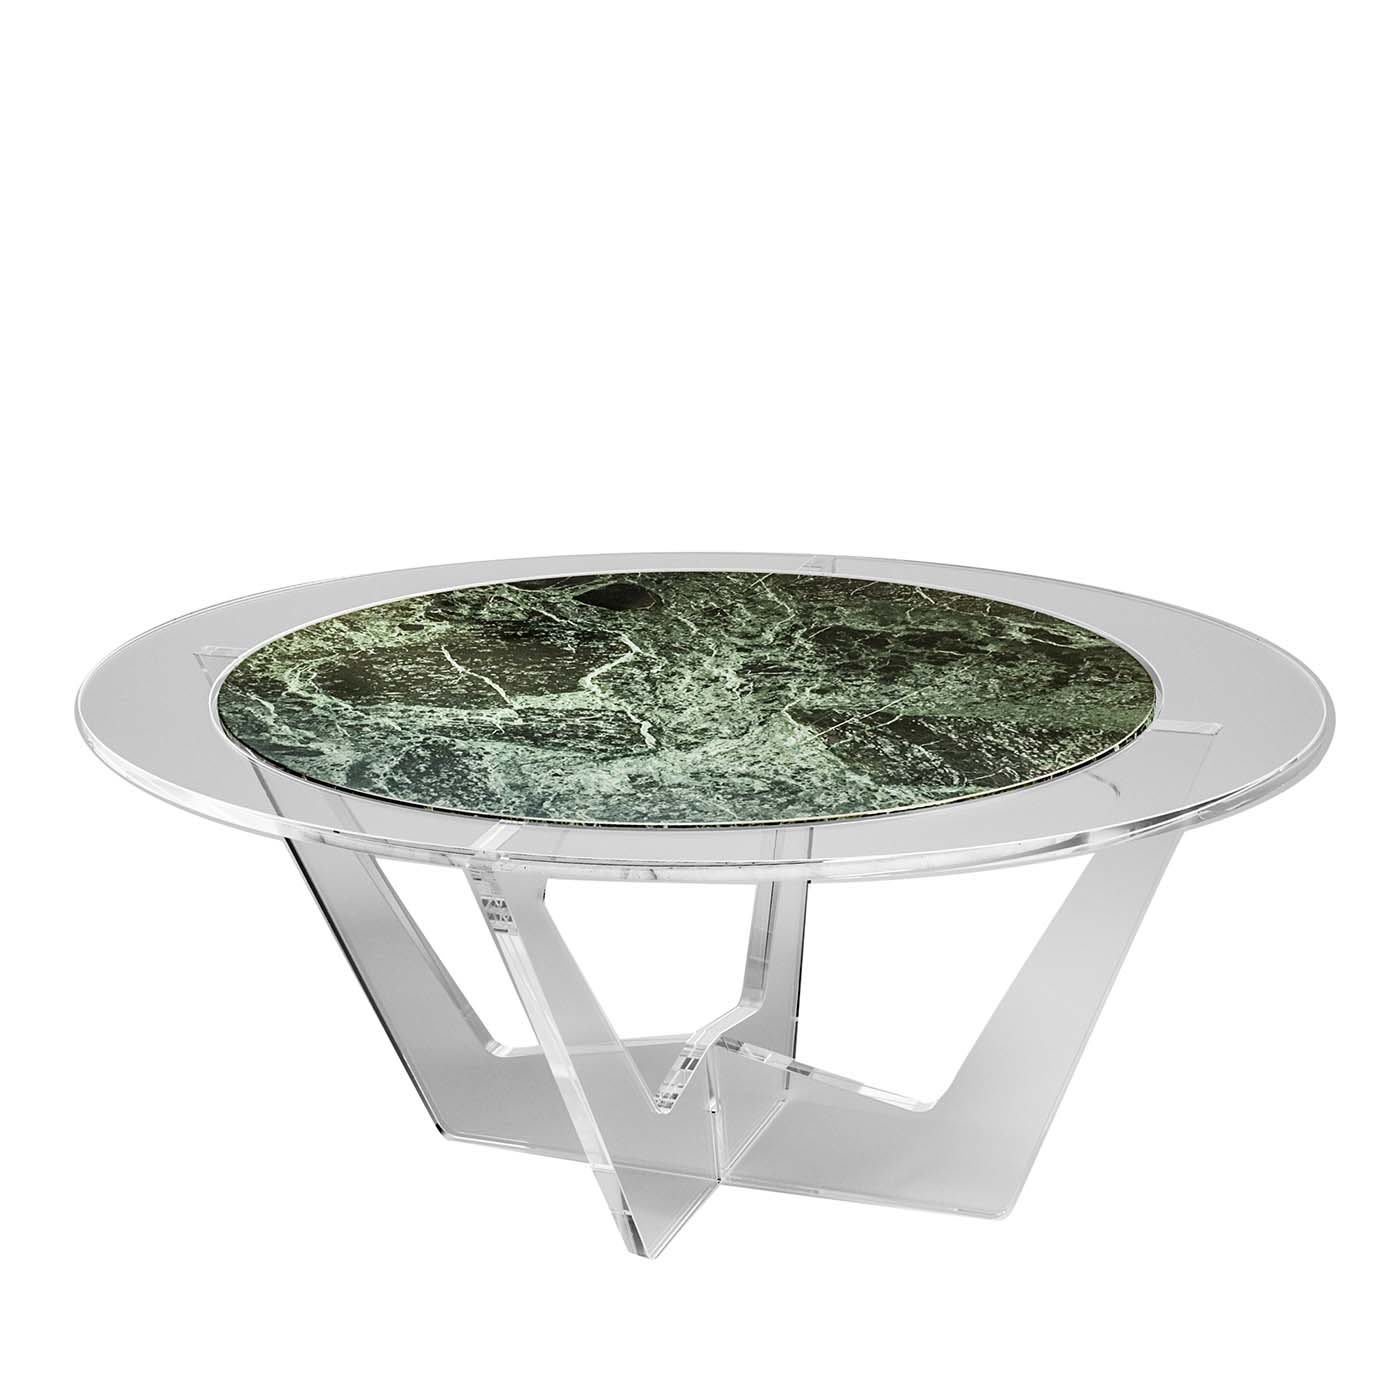 Hac Oval Coffee Table with Green Alps Marble Top - Madea Milano